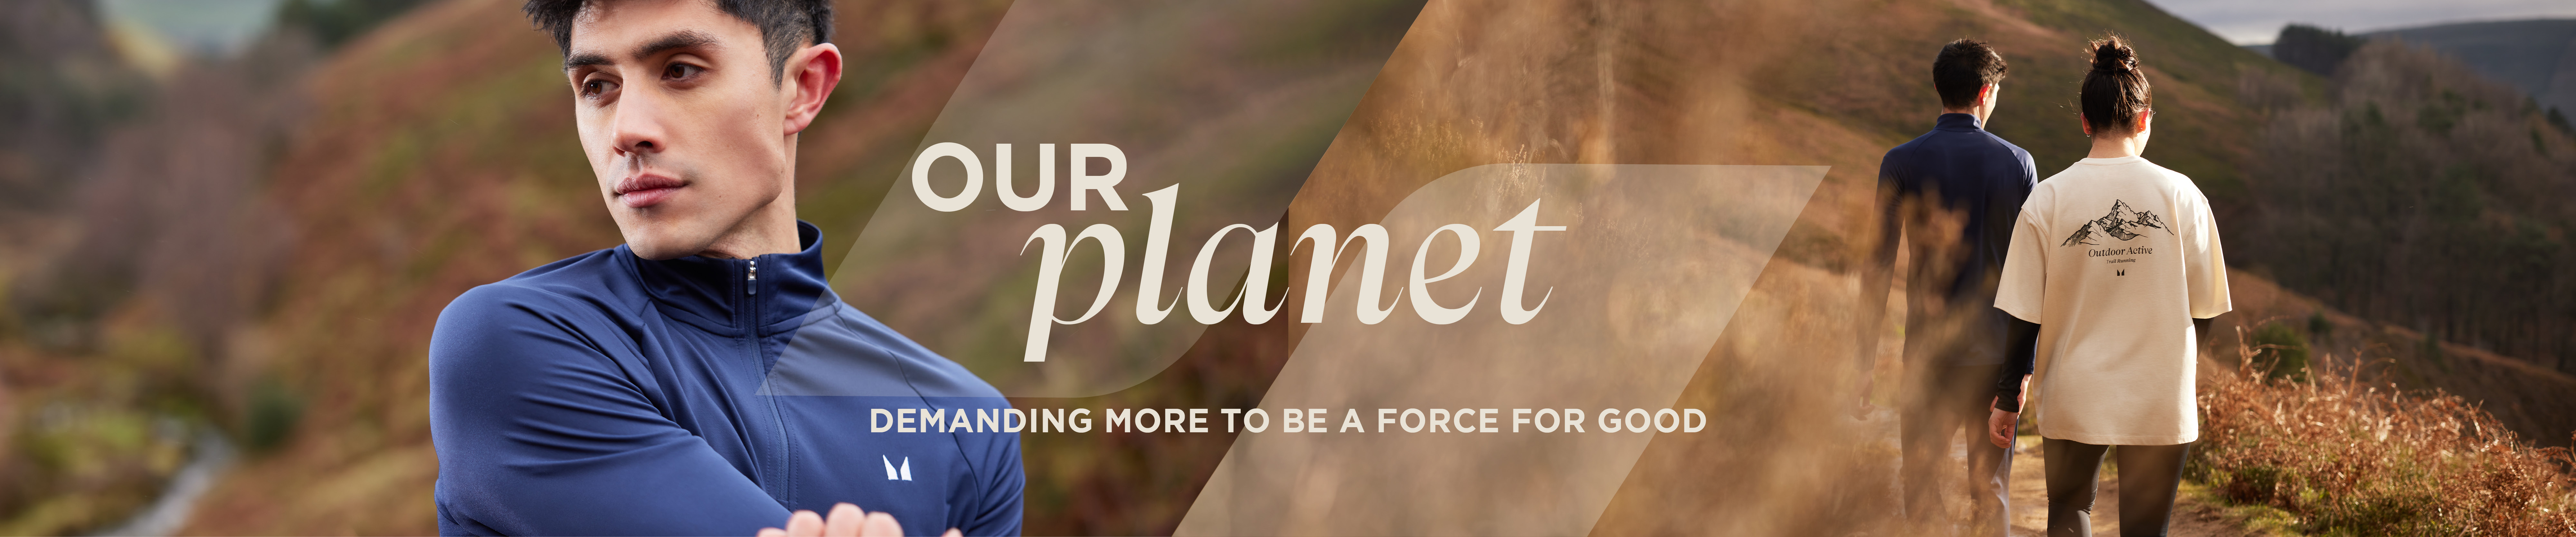 Our planet, Demanding more to be a force for good